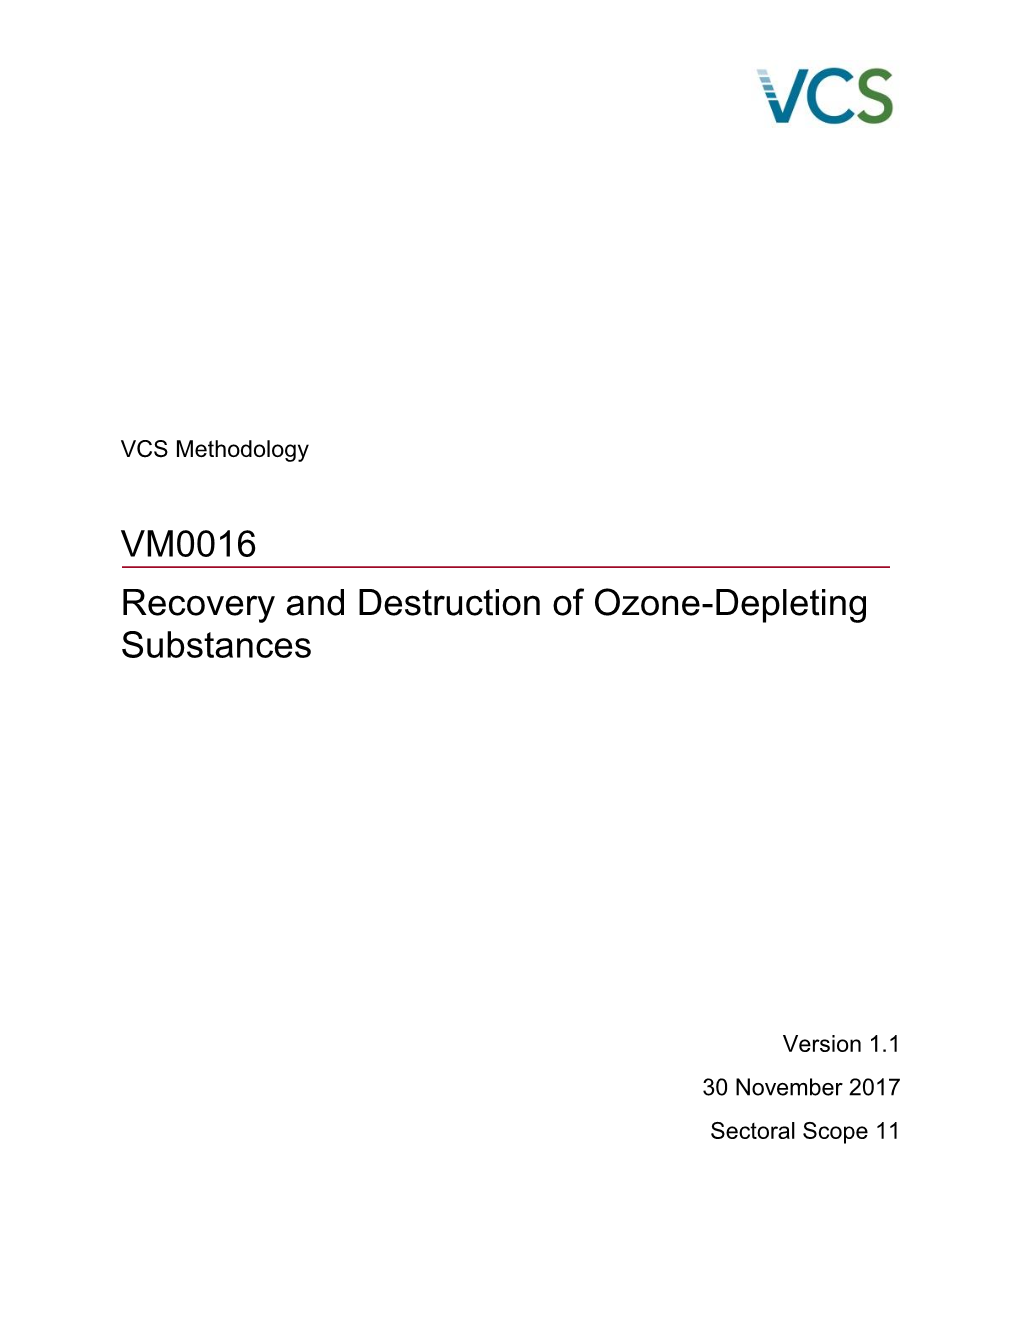 VM0016 Recovery and Destruction of Ozone-Depleting Substances